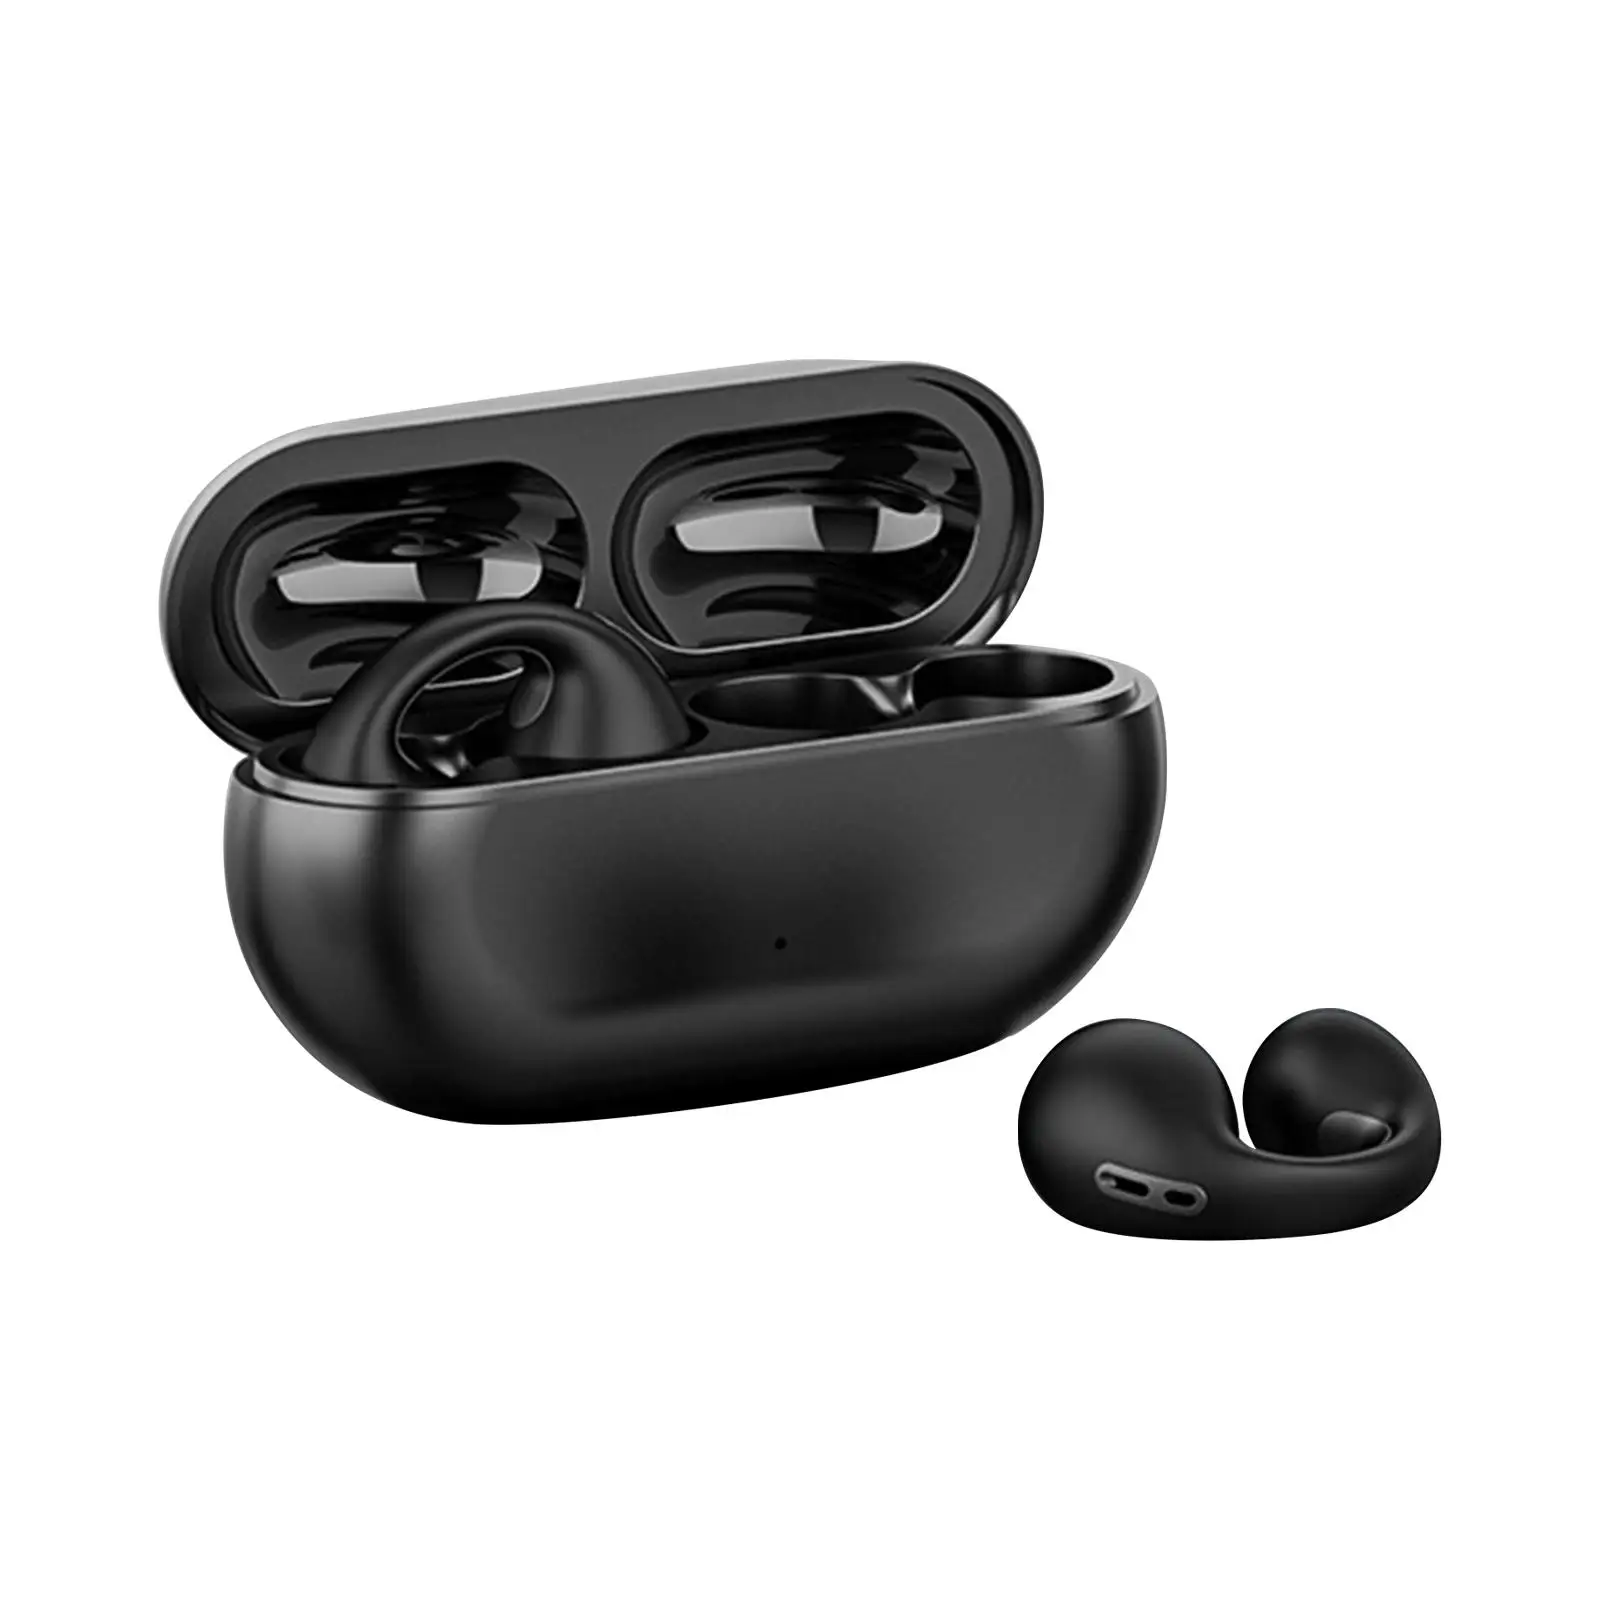 Clip On Wireless Earphones Comfortable to Wear Dual Noise Reduction Sport Earbuds Headset Earpiece for Running Driving Fitness